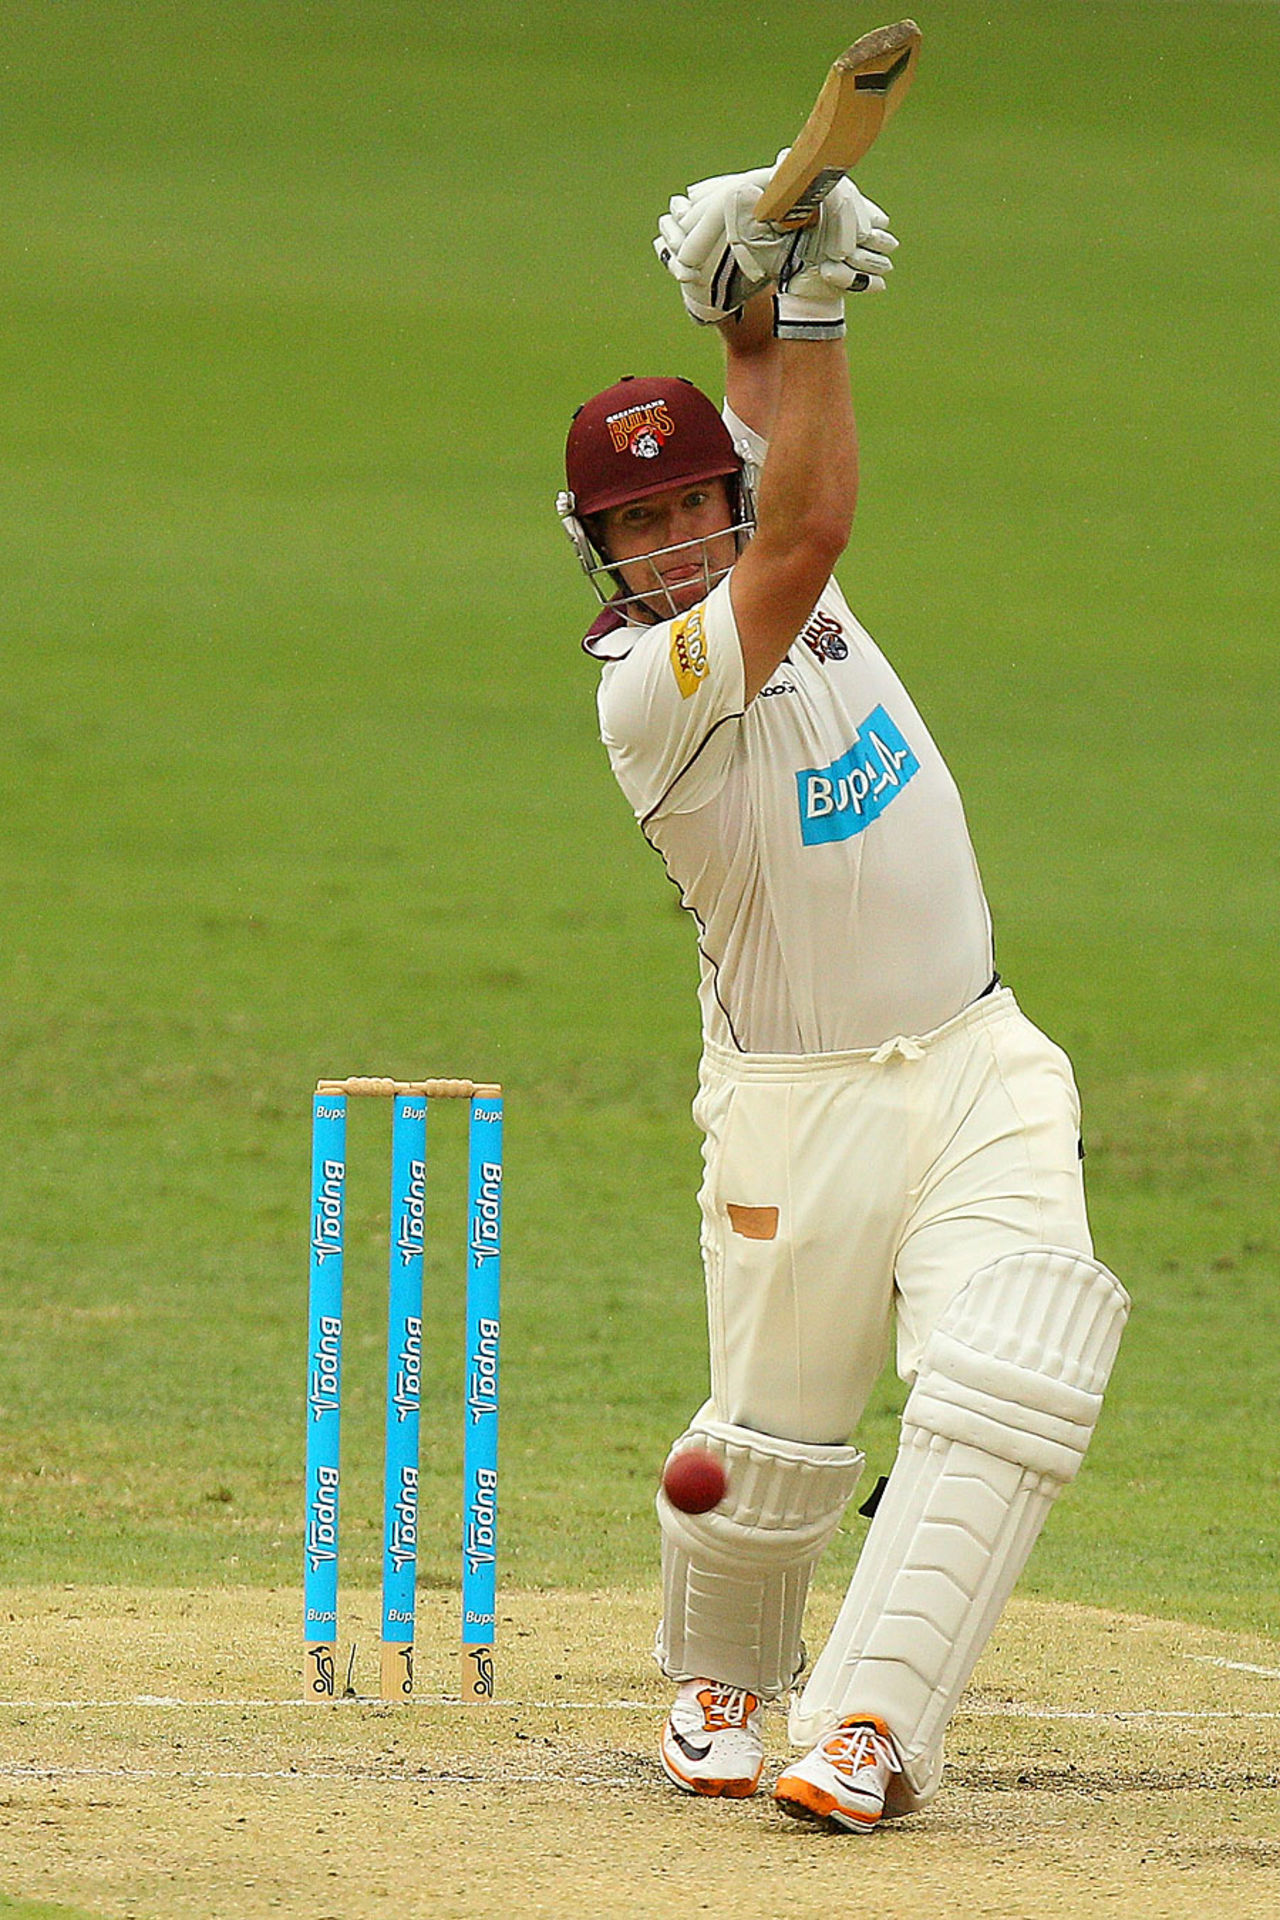 James Hopes drives on his way to a half-century, Queensland v Tasmania, Sheffield Shield Final, 2nd day, Brisbane, March 17 2012